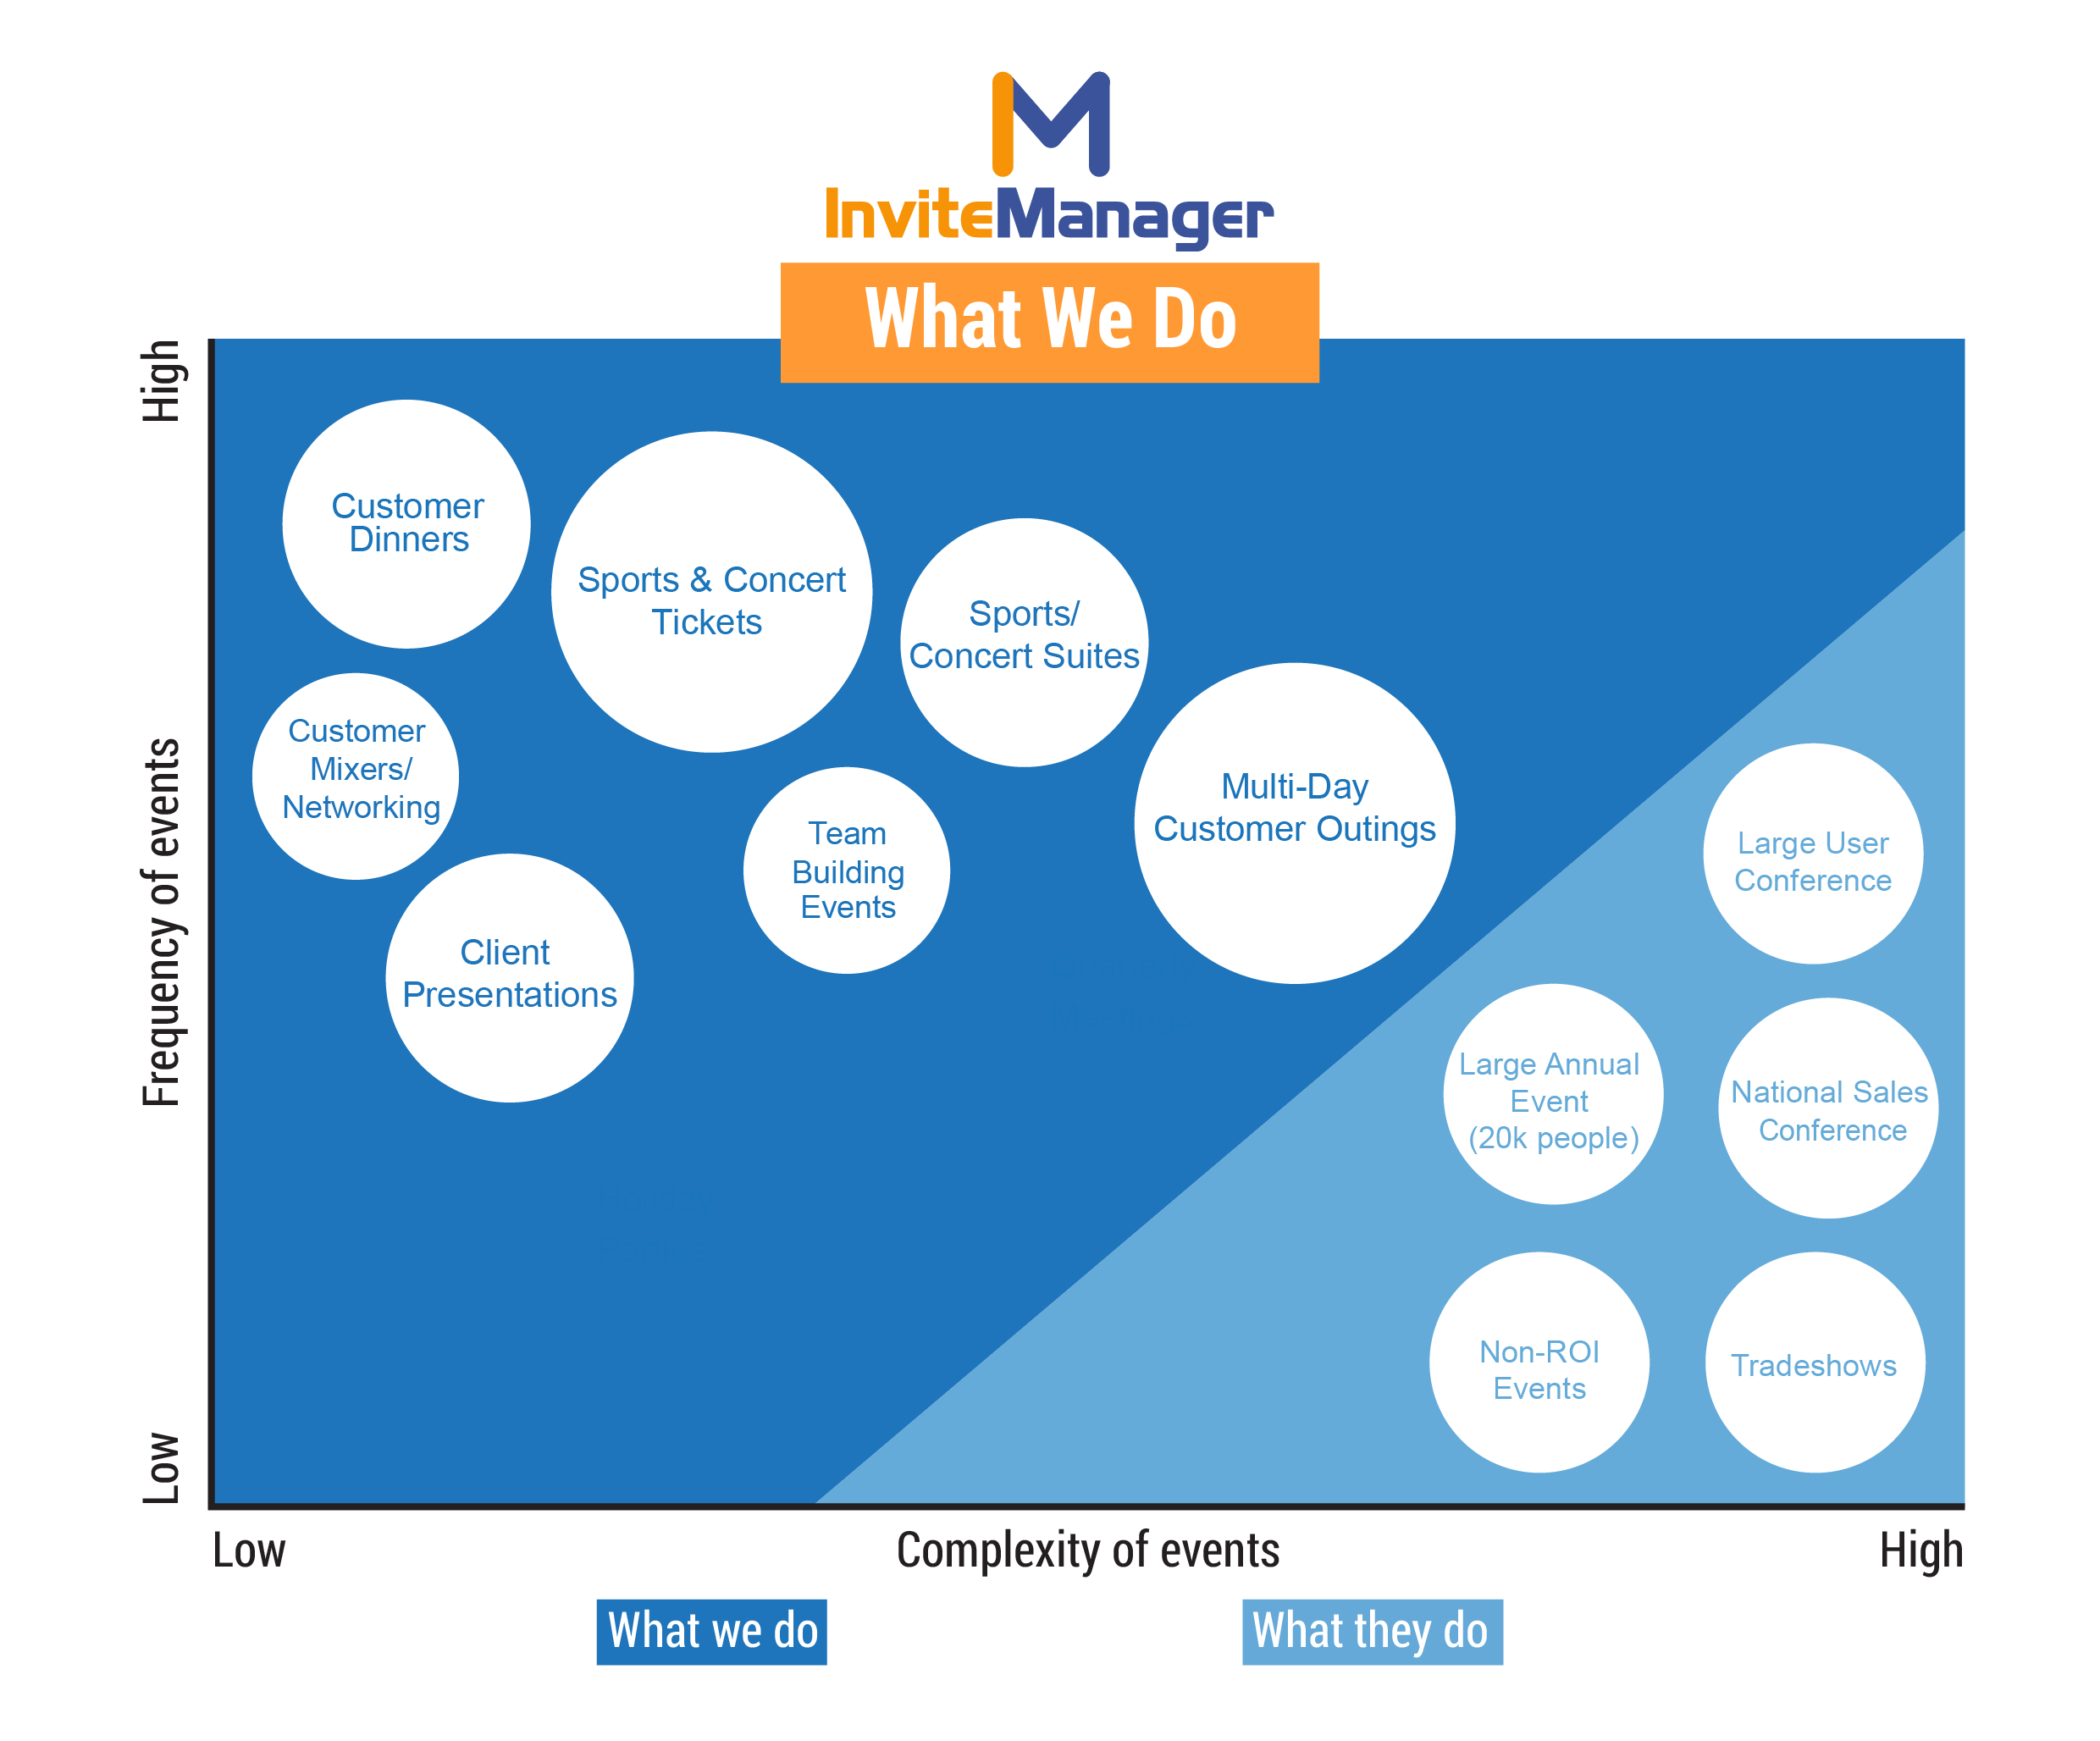 InviteManager: What We Do